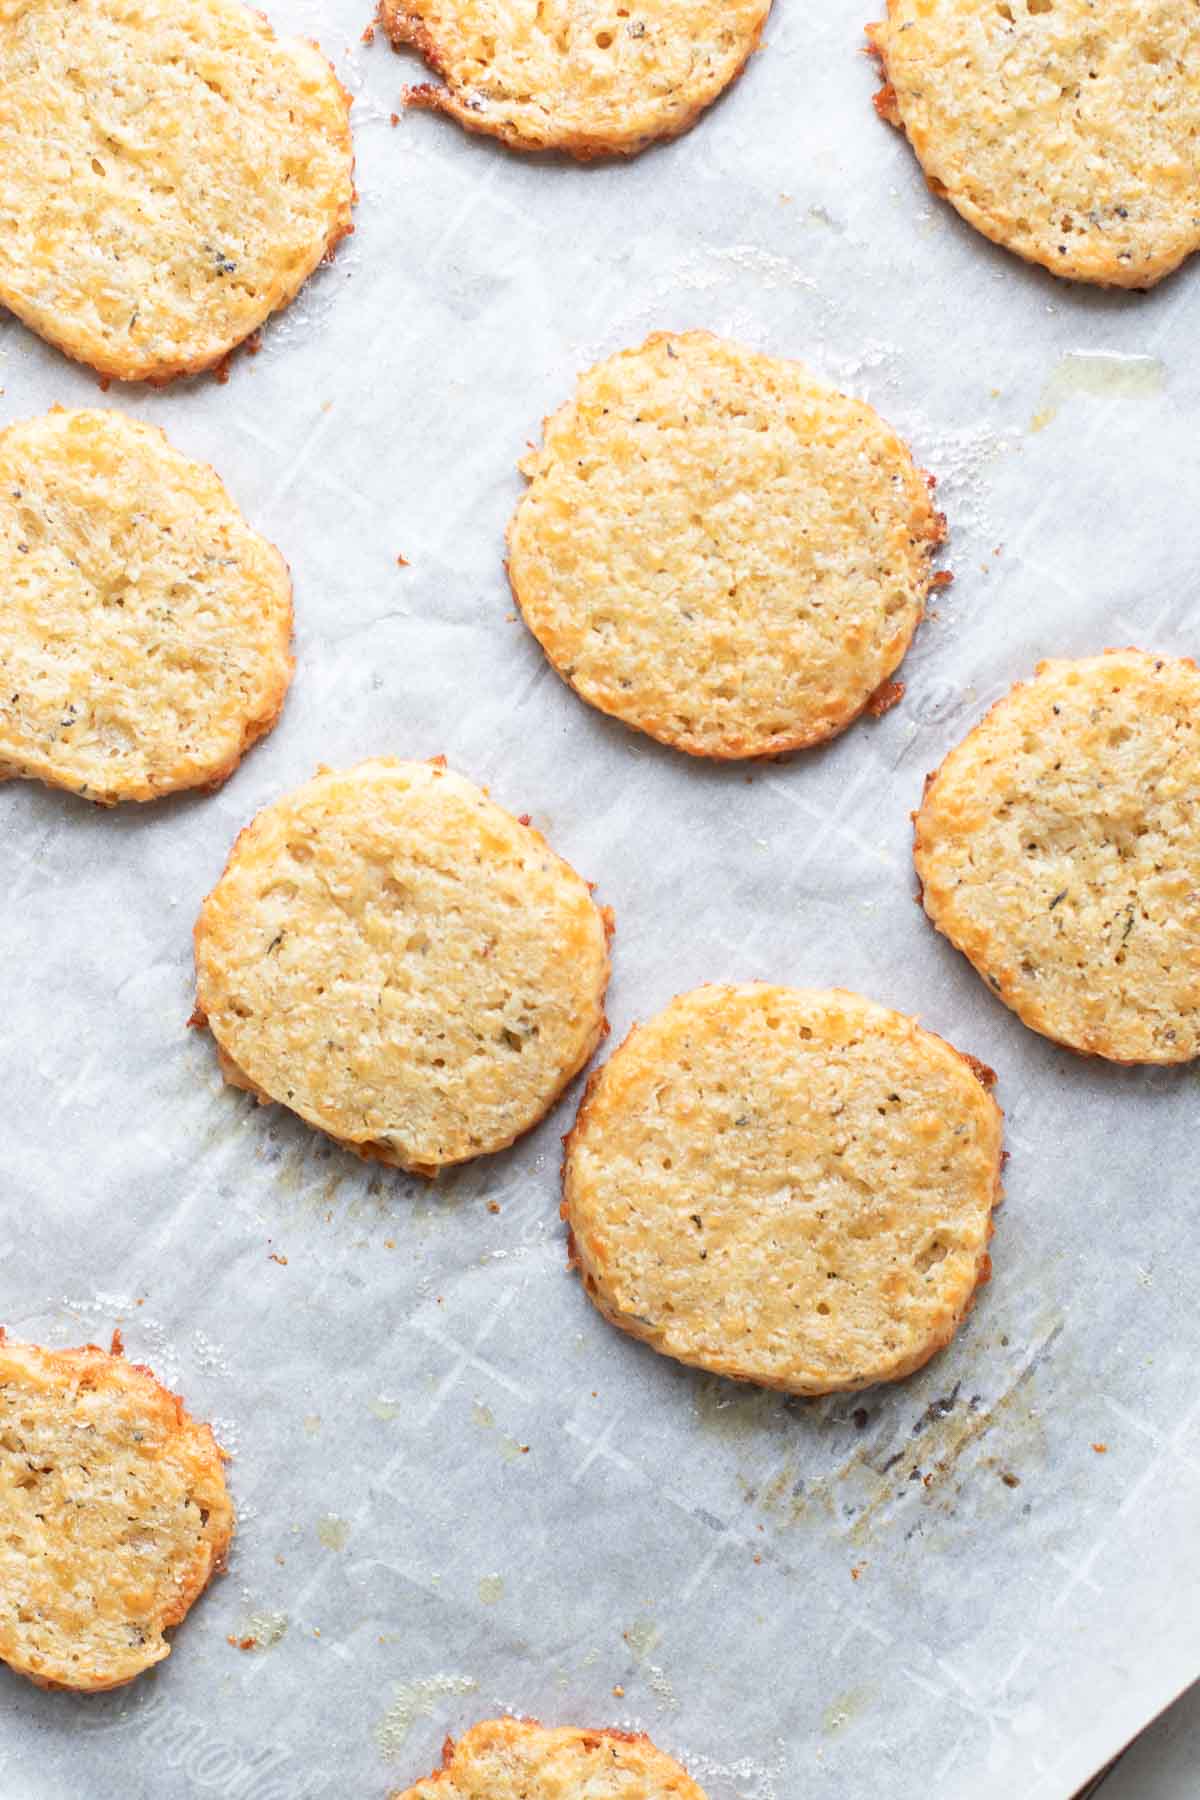 Baked cheese cookies on parchment